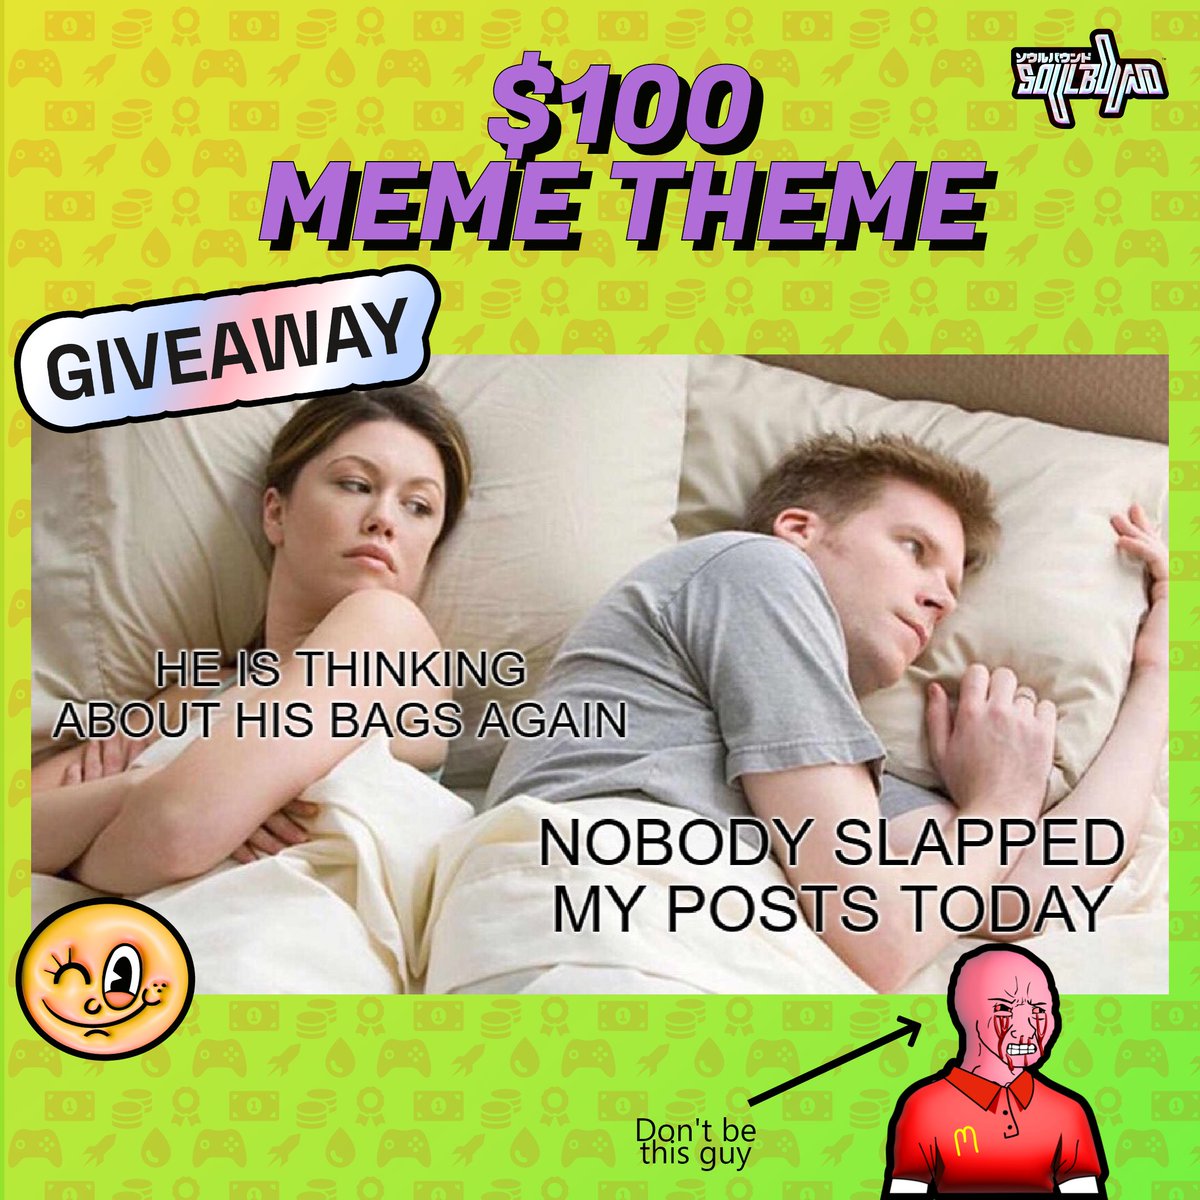 Good Morning Soulmates! 

Soulbound Meme Theme Contest 🎉

$100USD is up for grabs! To enter: 👇

◻️ Follow @Soulbound_GG 
◻️ Make a meme about Soulbound or DRIP 
◻️ Post it on Soulbound
◻️ screenshot your post and submit here

Good Luck